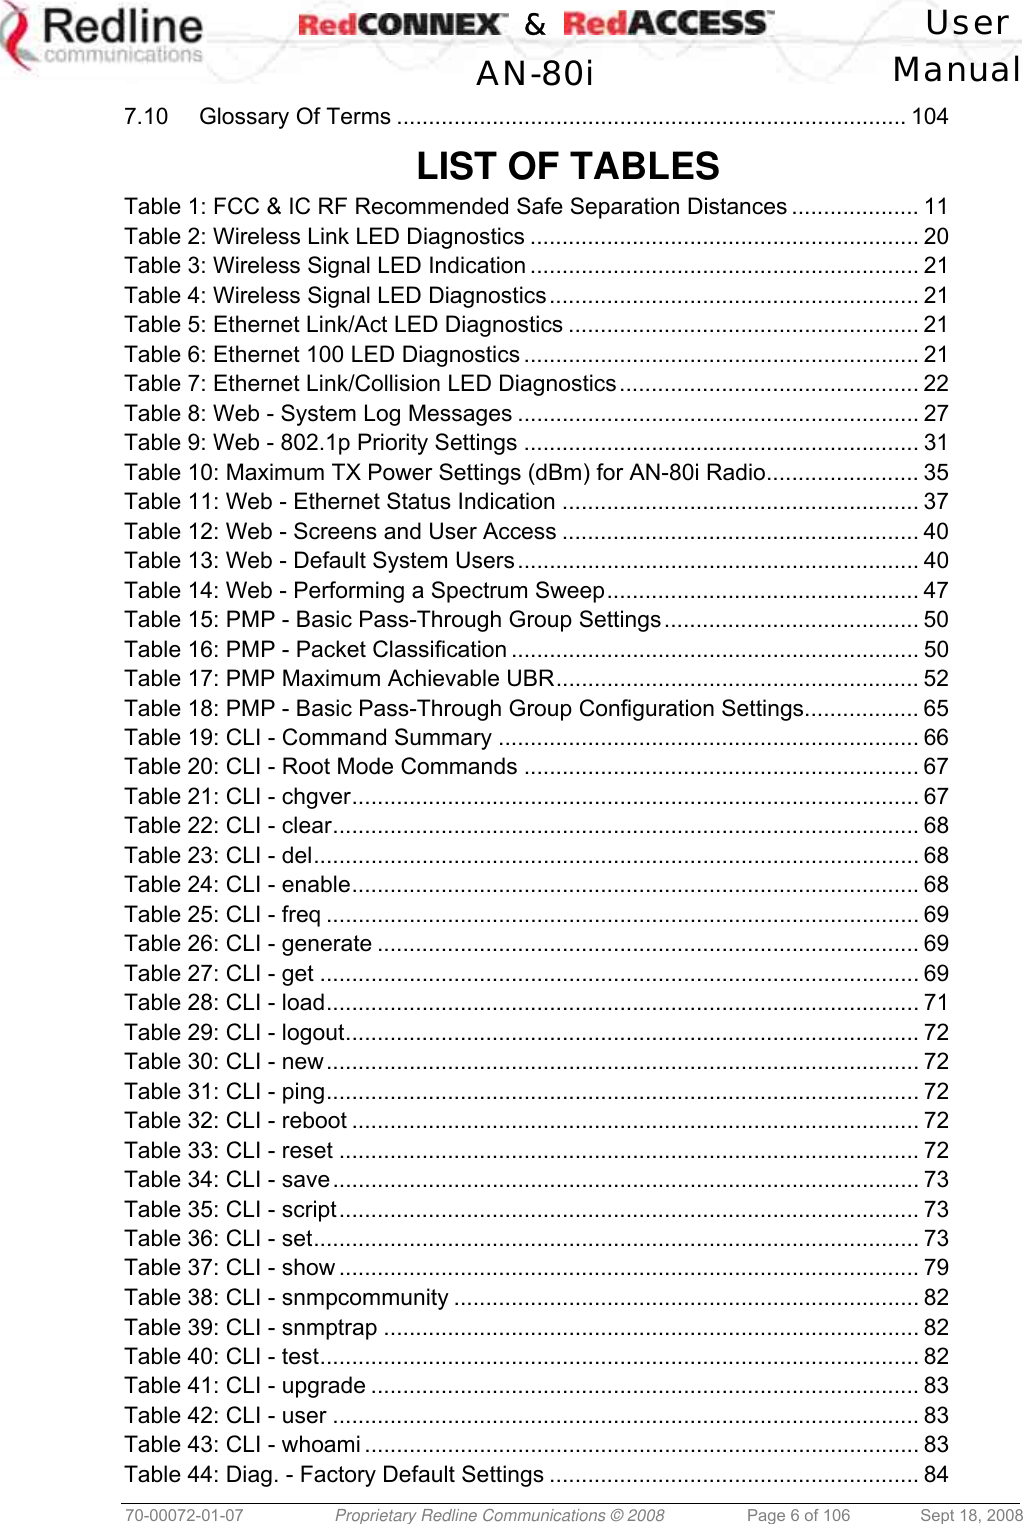    &amp;  User  AN-80i Manual  70-00072-01-07  Proprietary Redline Communications © 2008  Page 6 of 106  Sept 18, 2008 7.10 Glossary Of Terms ................................................................................ 104  LIST OF TABLES Table 1: FCC &amp; IC RF Recommended Safe Separation Distances .................... 11 Table 2: Wireless Link LED Diagnostics ............................................................. 20 Table 3: Wireless Signal LED Indication ............................................................. 21 Table 4: Wireless Signal LED Diagnostics.......................................................... 21 Table 5: Ethernet Link/Act LED Diagnostics ....................................................... 21 Table 6: Ethernet 100 LED Diagnostics .............................................................. 21 Table 7: Ethernet Link/Collision LED Diagnostics............................................... 22 Table 8: Web - System Log Messages ............................................................... 27 Table 9: Web - 802.1p Priority Settings .............................................................. 31 Table 10: Maximum TX Power Settings (dBm) for AN-80i Radio........................ 35 Table 11: Web - Ethernet Status Indication ........................................................ 37 Table 12: Web - Screens and User Access ........................................................ 40 Table 13: Web - Default System Users............................................................... 40 Table 14: Web - Performing a Spectrum Sweep................................................. 47 Table 15: PMP - Basic Pass-Through Group Settings........................................ 50 Table 16: PMP - Packet Classification ................................................................ 50 Table 17: PMP Maximum Achievable UBR......................................................... 52 Table 18: PMP - Basic Pass-Through Group Configuration Settings.................. 65 Table 19: CLI - Command Summary .................................................................. 66 Table 20: CLI - Root Mode Commands .............................................................. 67 Table 21: CLI - chgver......................................................................................... 67 Table 22: CLI - clear............................................................................................ 68 Table 23: CLI - del............................................................................................... 68 Table 24: CLI - enable......................................................................................... 68 Table 25: CLI - freq ............................................................................................. 69 Table 26: CLI - generate ..................................................................................... 69 Table 27: CLI - get .............................................................................................. 69 Table 28: CLI - load............................................................................................. 71 Table 29: CLI - logout.......................................................................................... 72 Table 30: CLI - new............................................................................................. 72 Table 31: CLI - ping............................................................................................. 72 Table 32: CLI - reboot ......................................................................................... 72 Table 33: CLI - reset ........................................................................................... 72 Table 34: CLI - save............................................................................................ 73 Table 35: CLI - script........................................................................................... 73 Table 36: CLI - set............................................................................................... 73 Table 37: CLI - show ........................................................................................... 79 Table 38: CLI - snmpcommunity ......................................................................... 82 Table 39: CLI - snmptrap .................................................................................... 82 Table 40: CLI - test.............................................................................................. 82 Table 41: CLI - upgrade ...................................................................................... 83 Table 42: CLI - user ............................................................................................ 83 Table 43: CLI - whoami ....................................................................................... 83 Table 44: Diag. - Factory Default Settings .......................................................... 84 